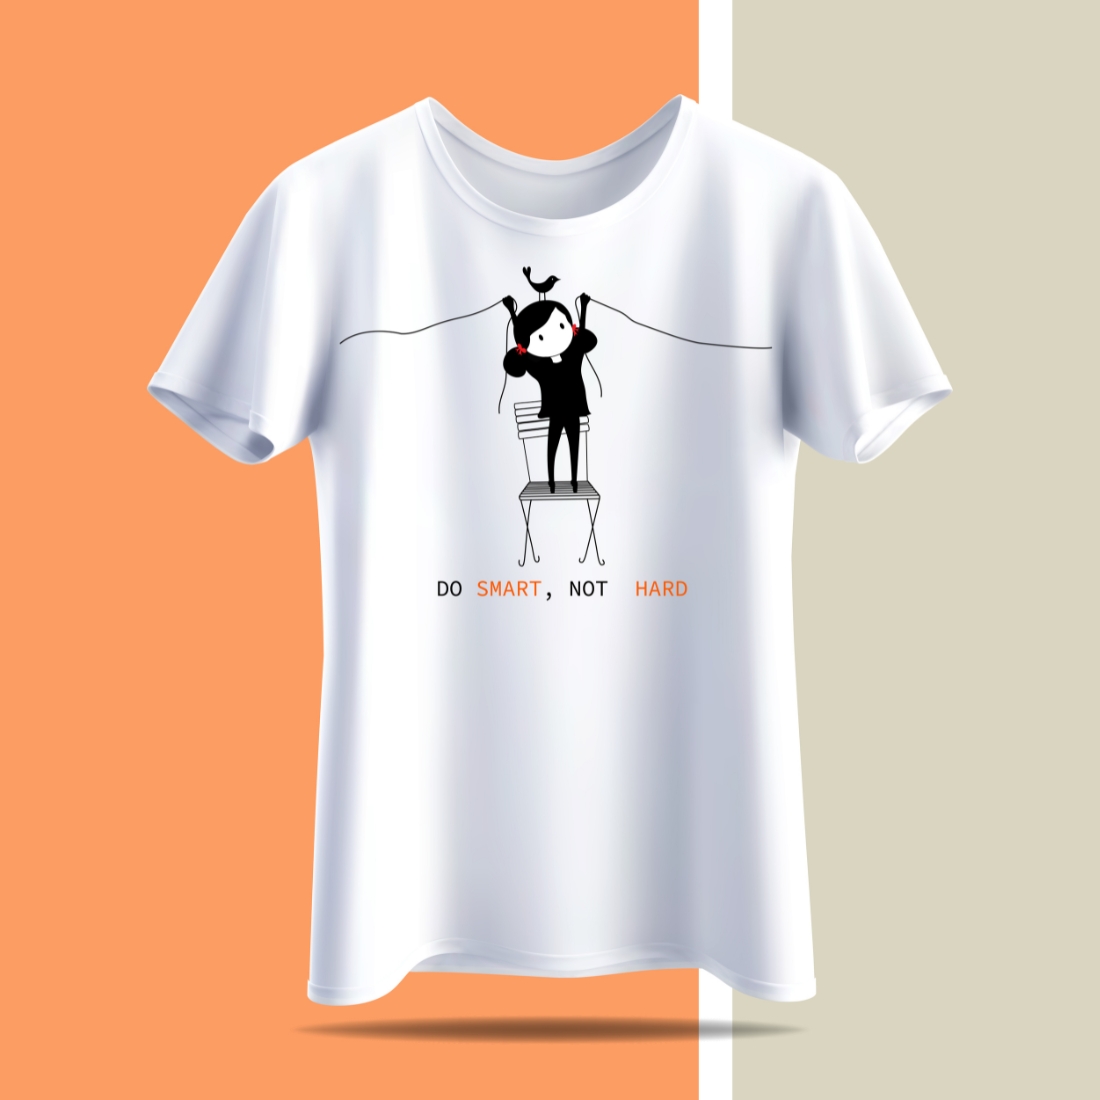 Bicolor background with classic white t-shirt with black girl graphic.